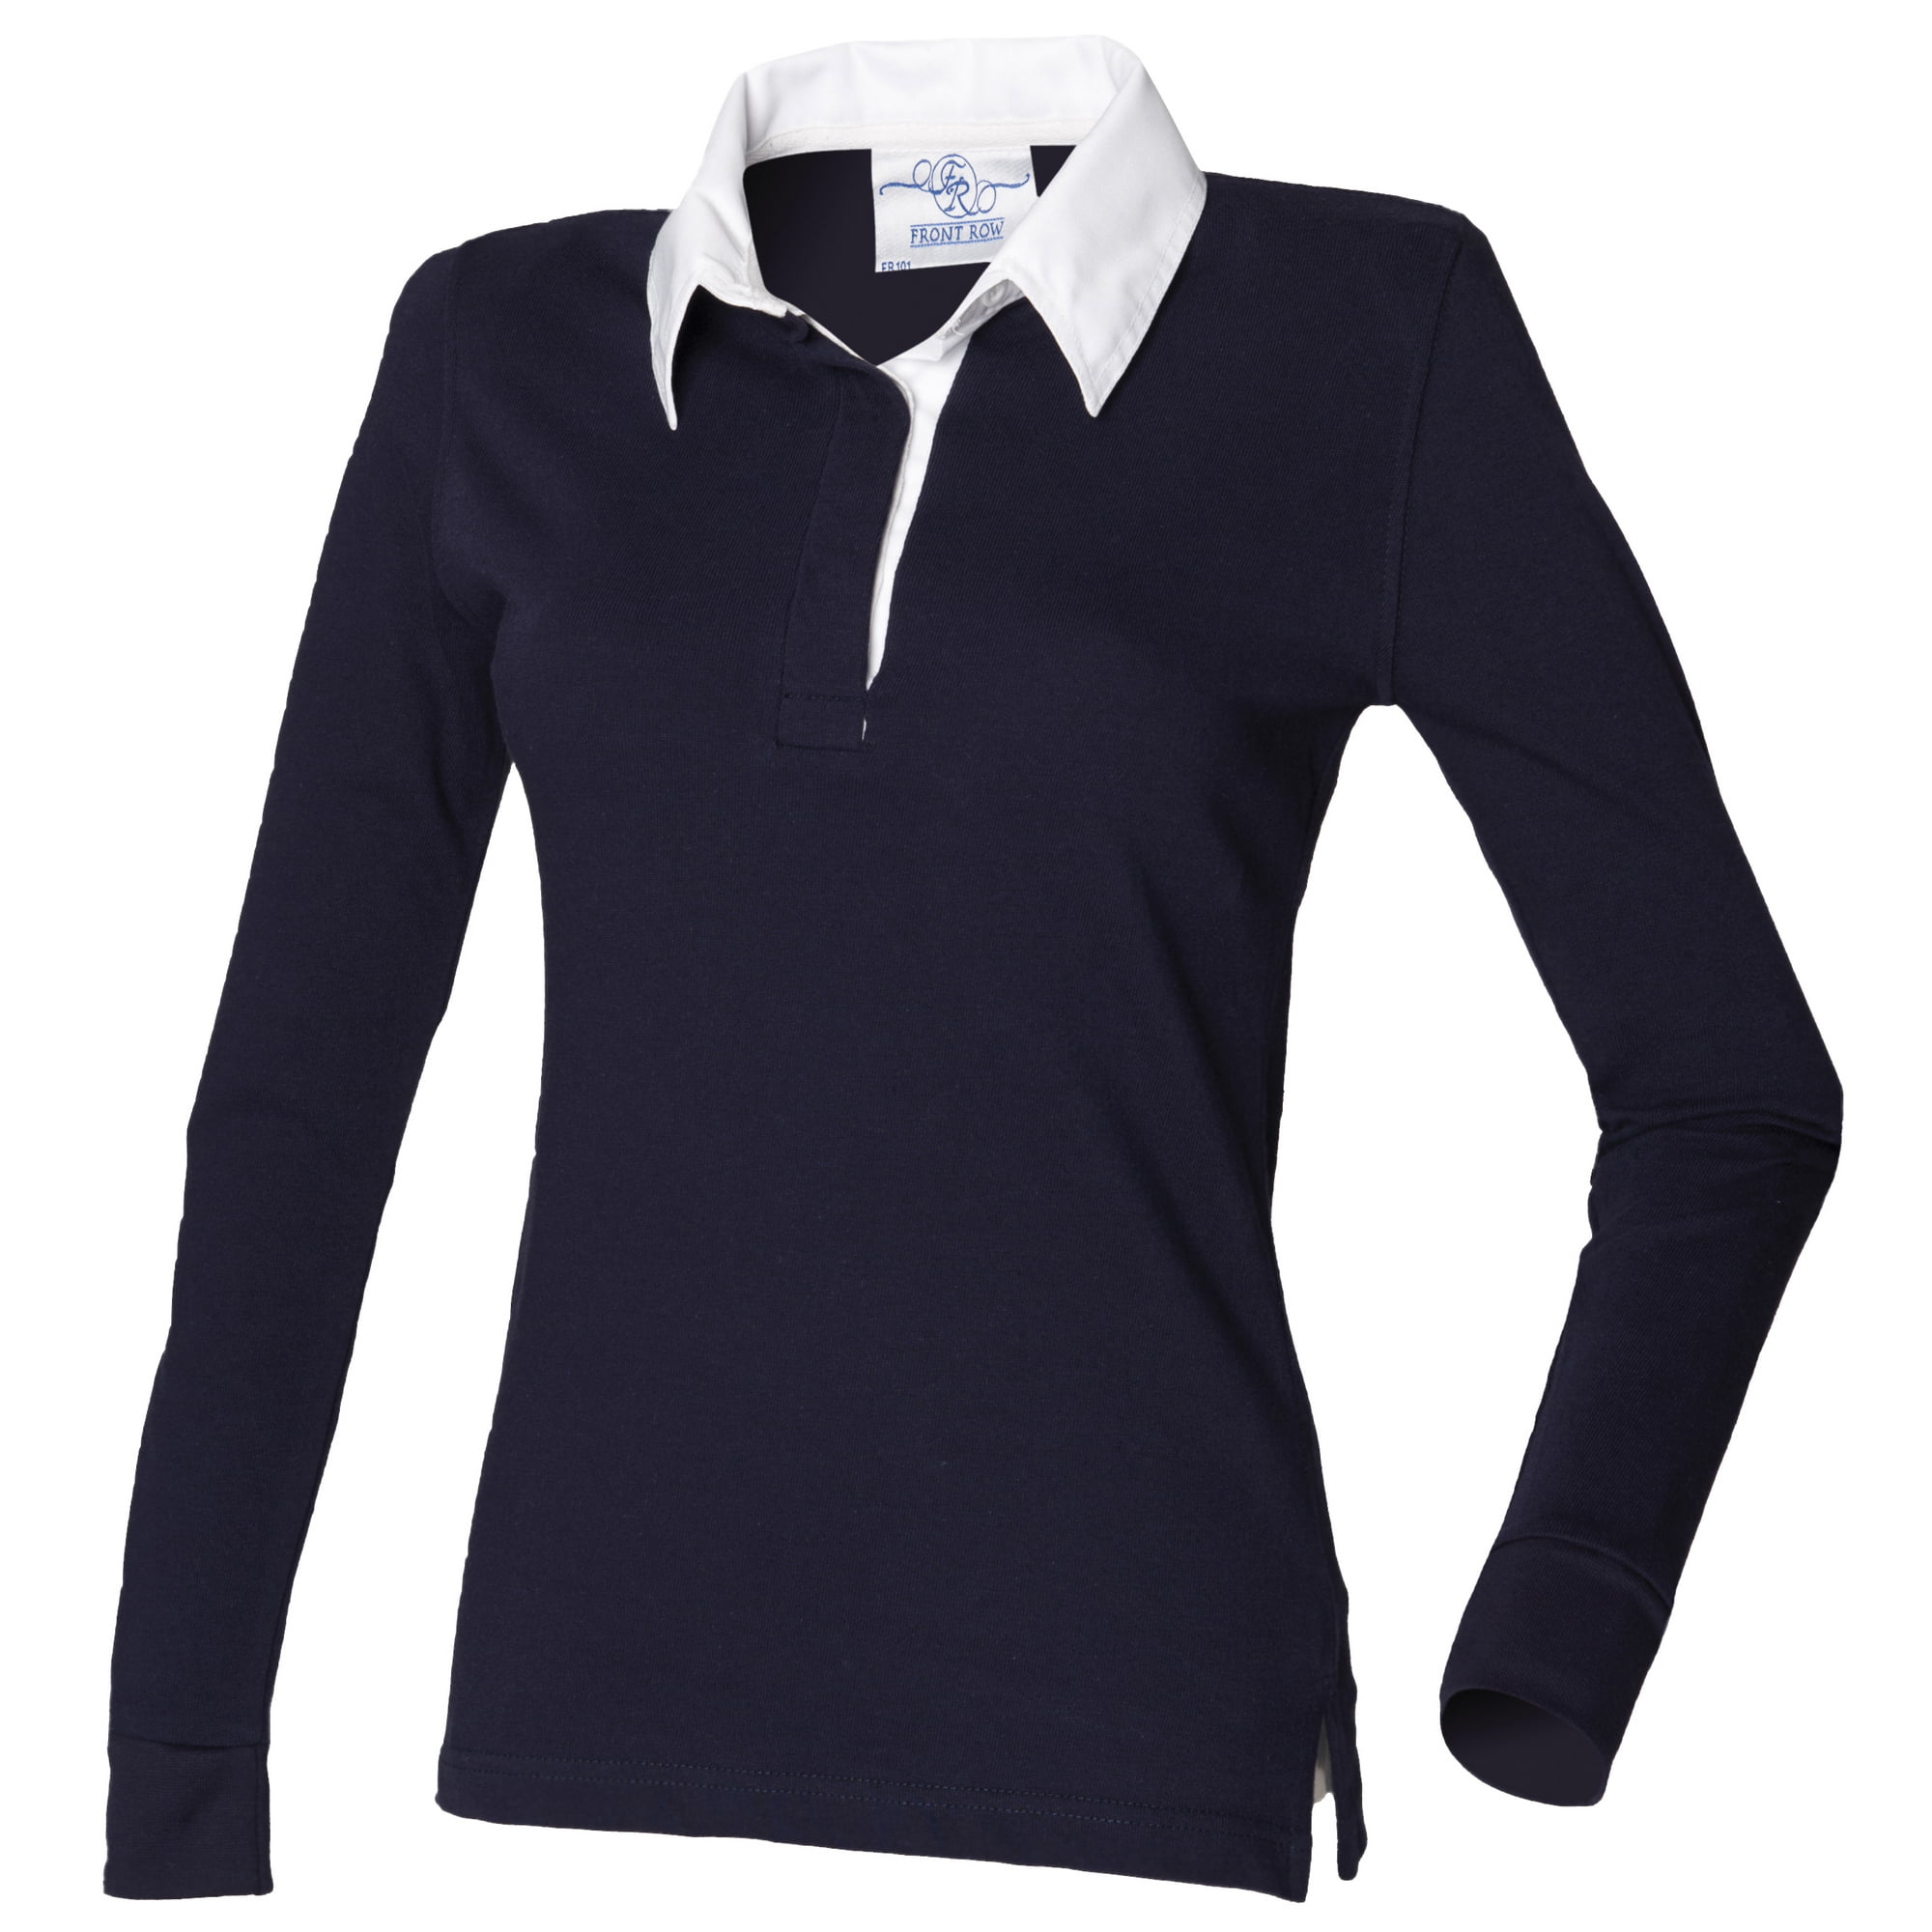 Front Row Long Sleeve Plain Rugby Shirt Colour:White/White Size:3XL